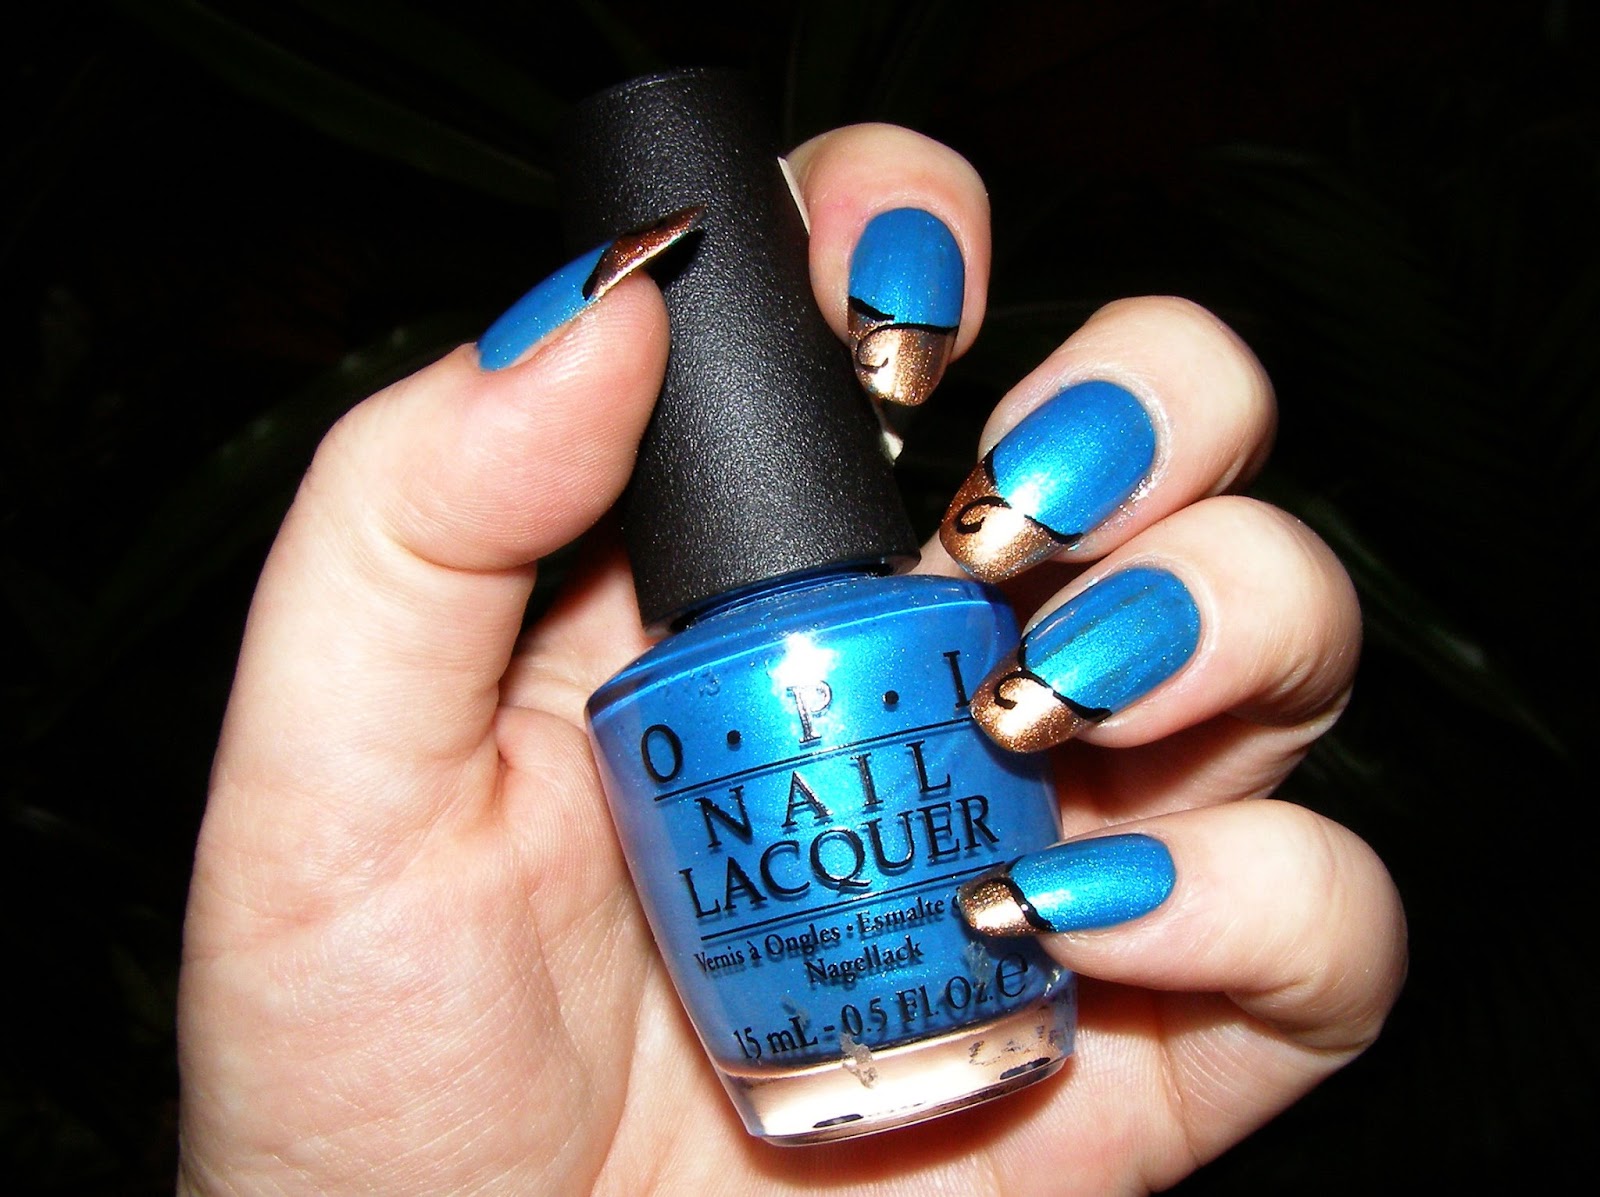 3. OPI GelColor in "Teal the Cows Come Home" - wide 2